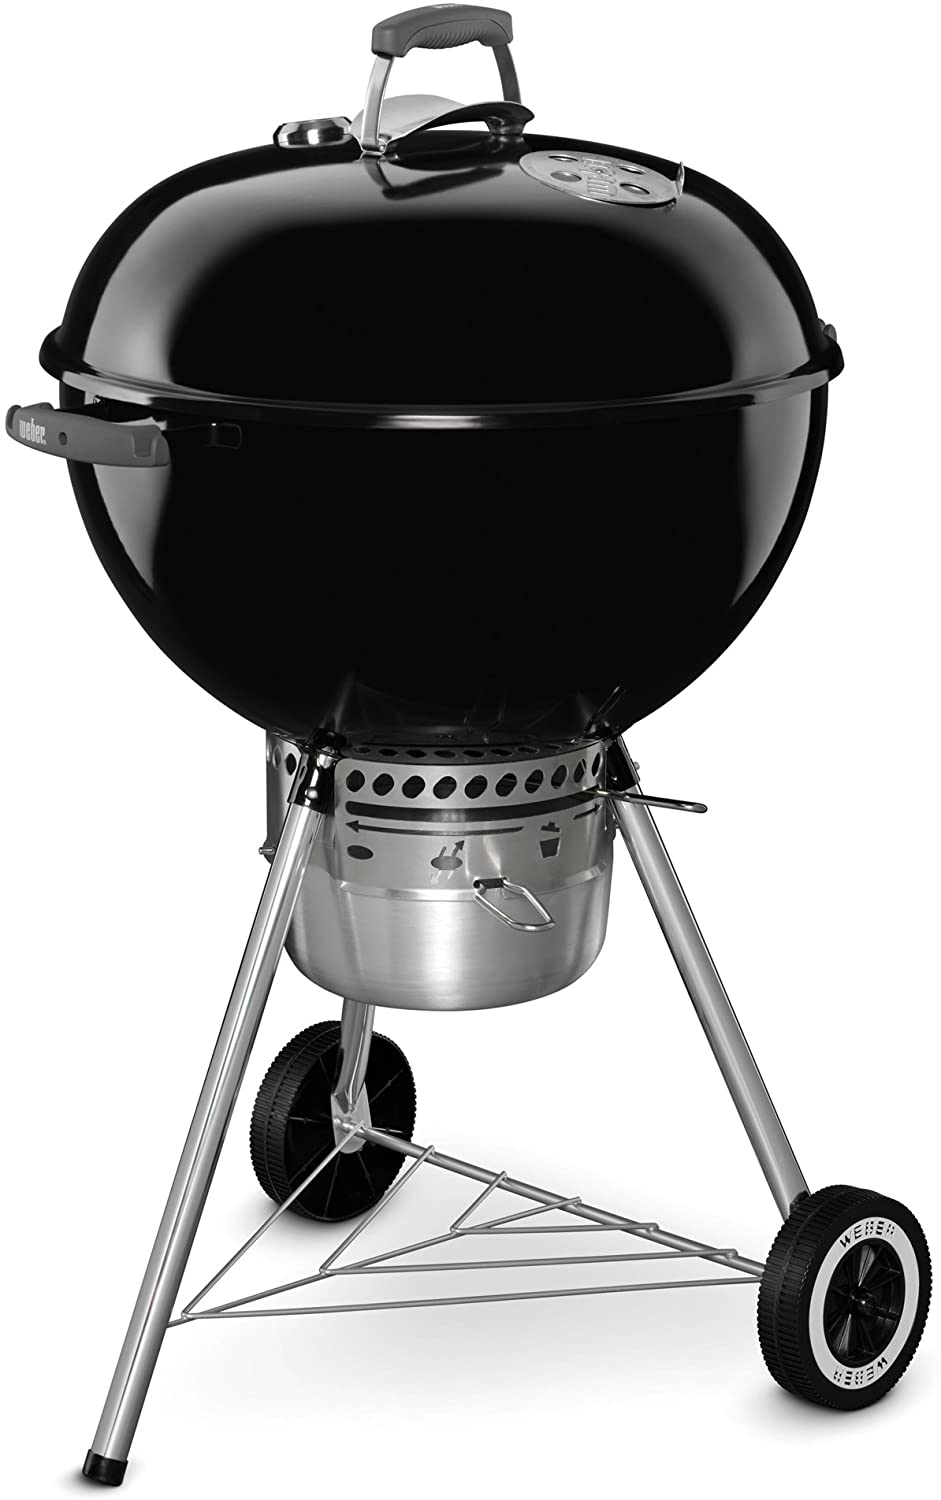 Grilling meal plan ideas: Start with the basics, a classic charcoal grill to bring out the best flavor.